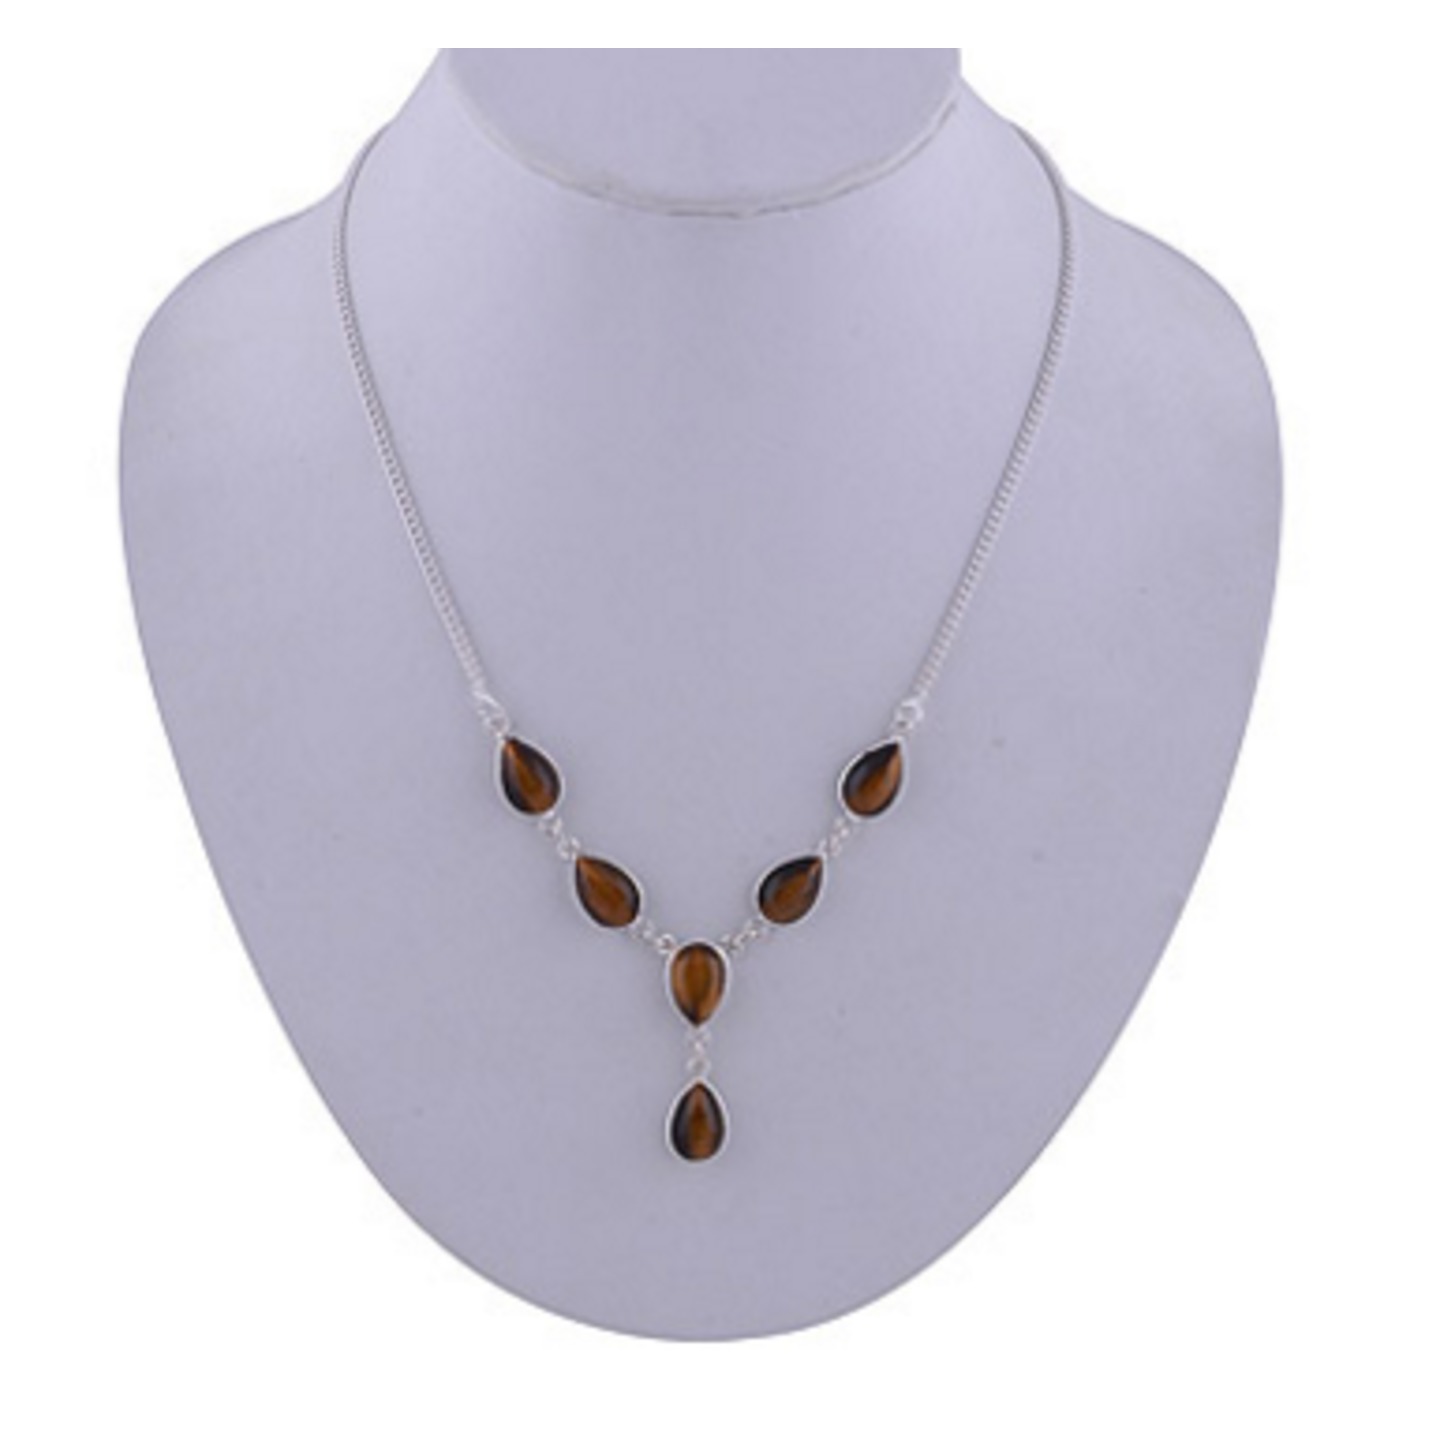 The Tiger Eye Silver Necklace